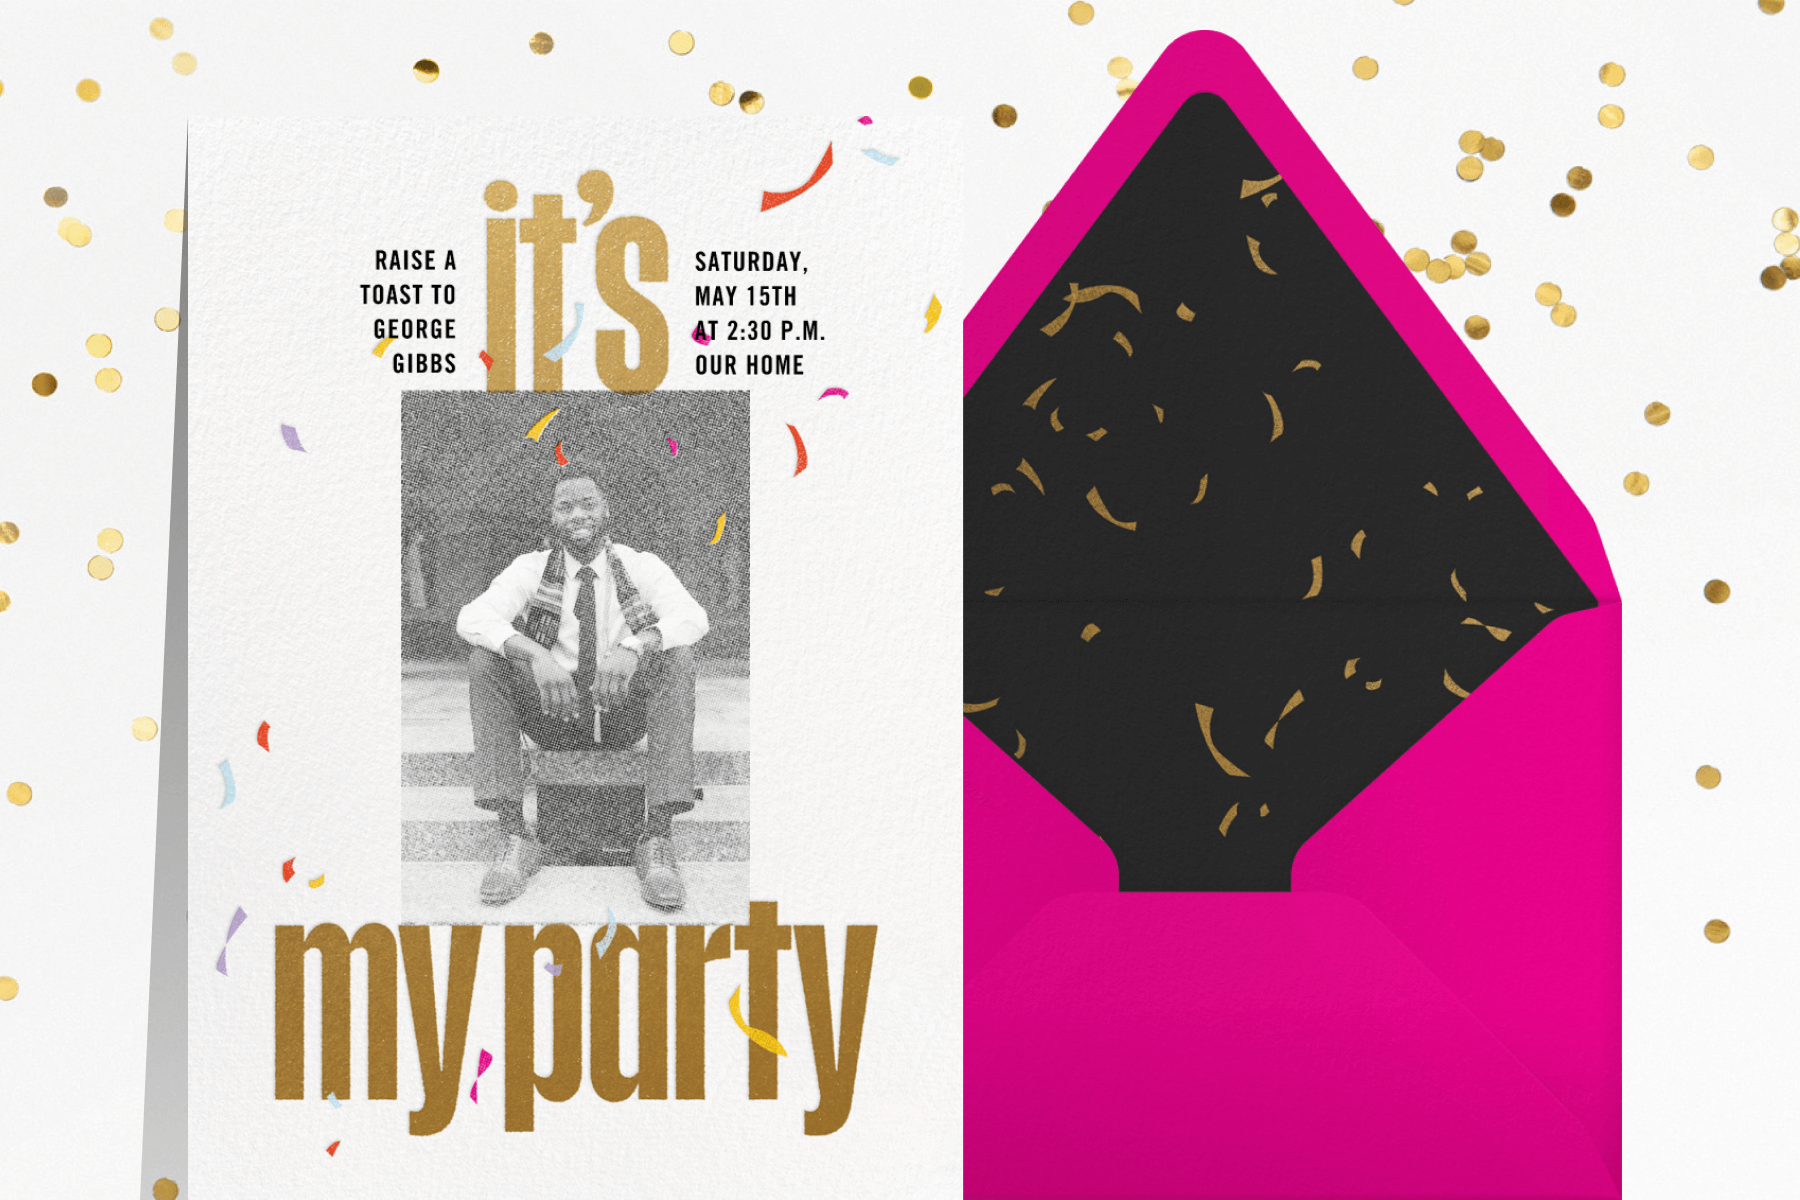 A birthday party invitation with a black and white photo of a man in the center, the words “it’s my party” in large gold letters, and colorful confetti next to a hot pink envelope.